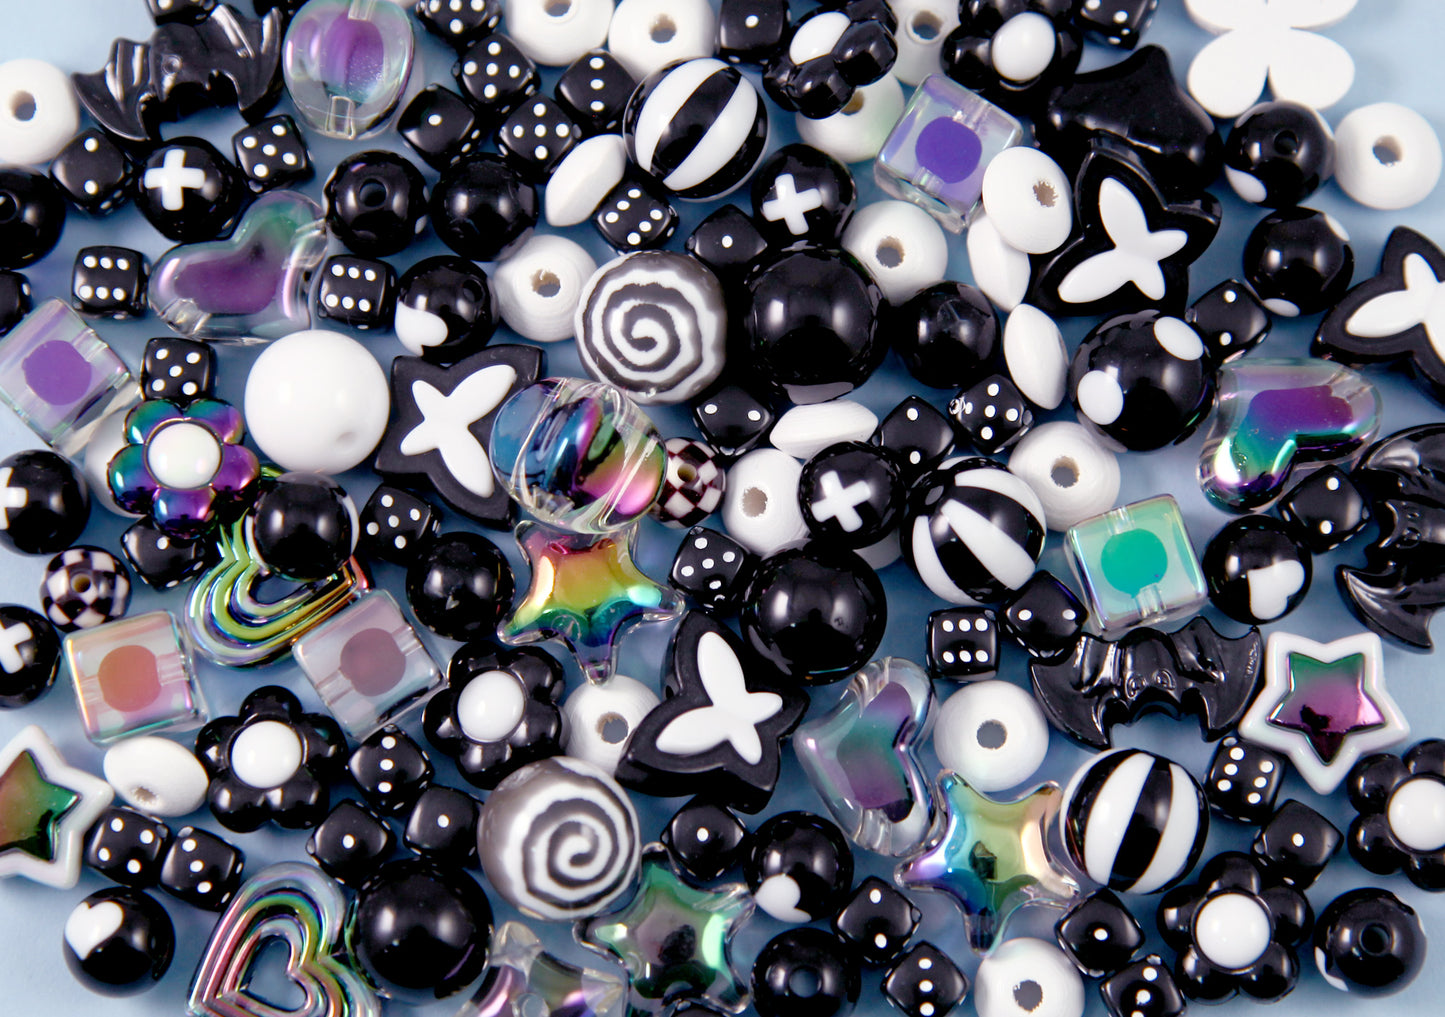 Acrylic Bead Grab Bag - Black and White - Mixed Lot of Plastic Beads - great for kandi, ispy, sensory crafts, jewelry making - Over 100 pcs